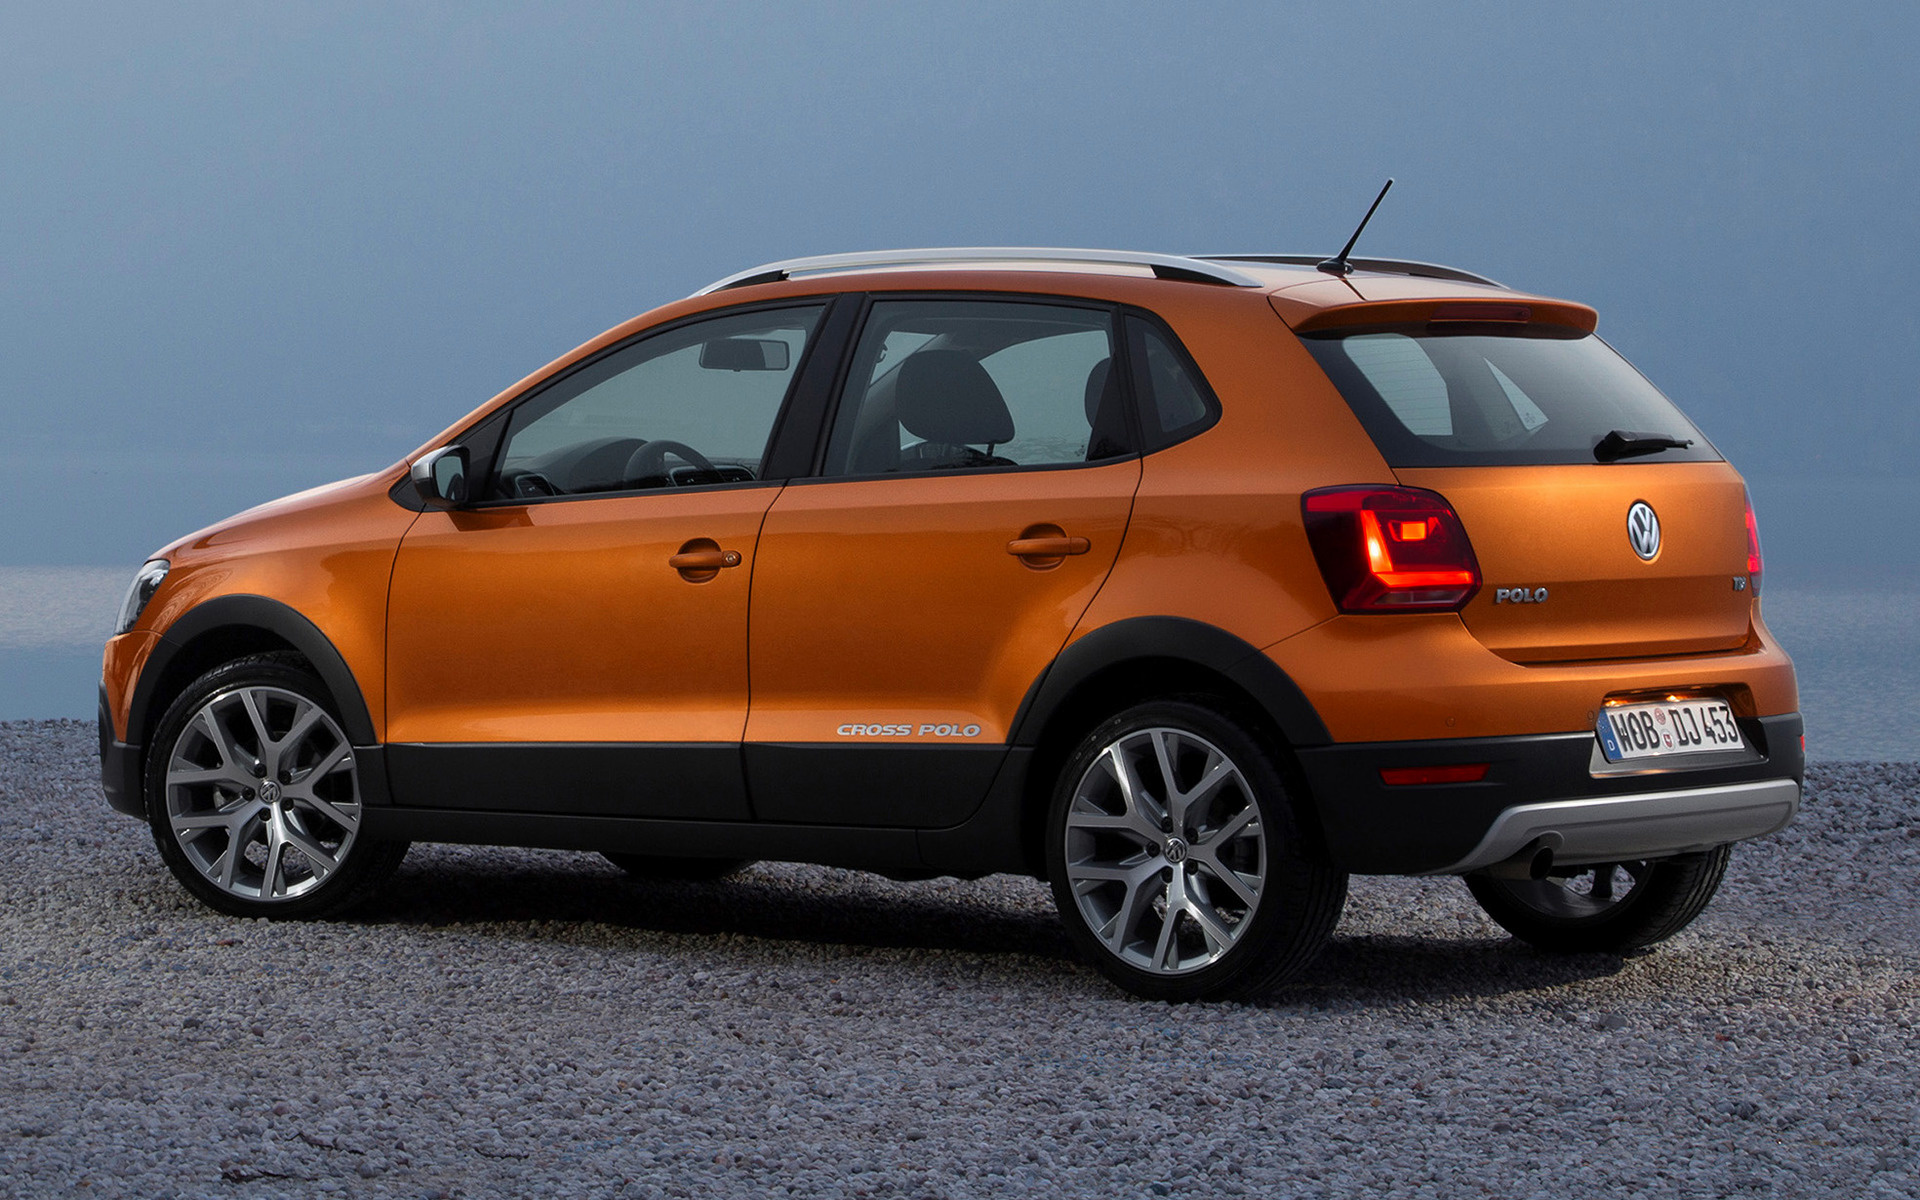 2014 Volkswagen Cross Polo - Wallpapers and HD Images | Car Pixel